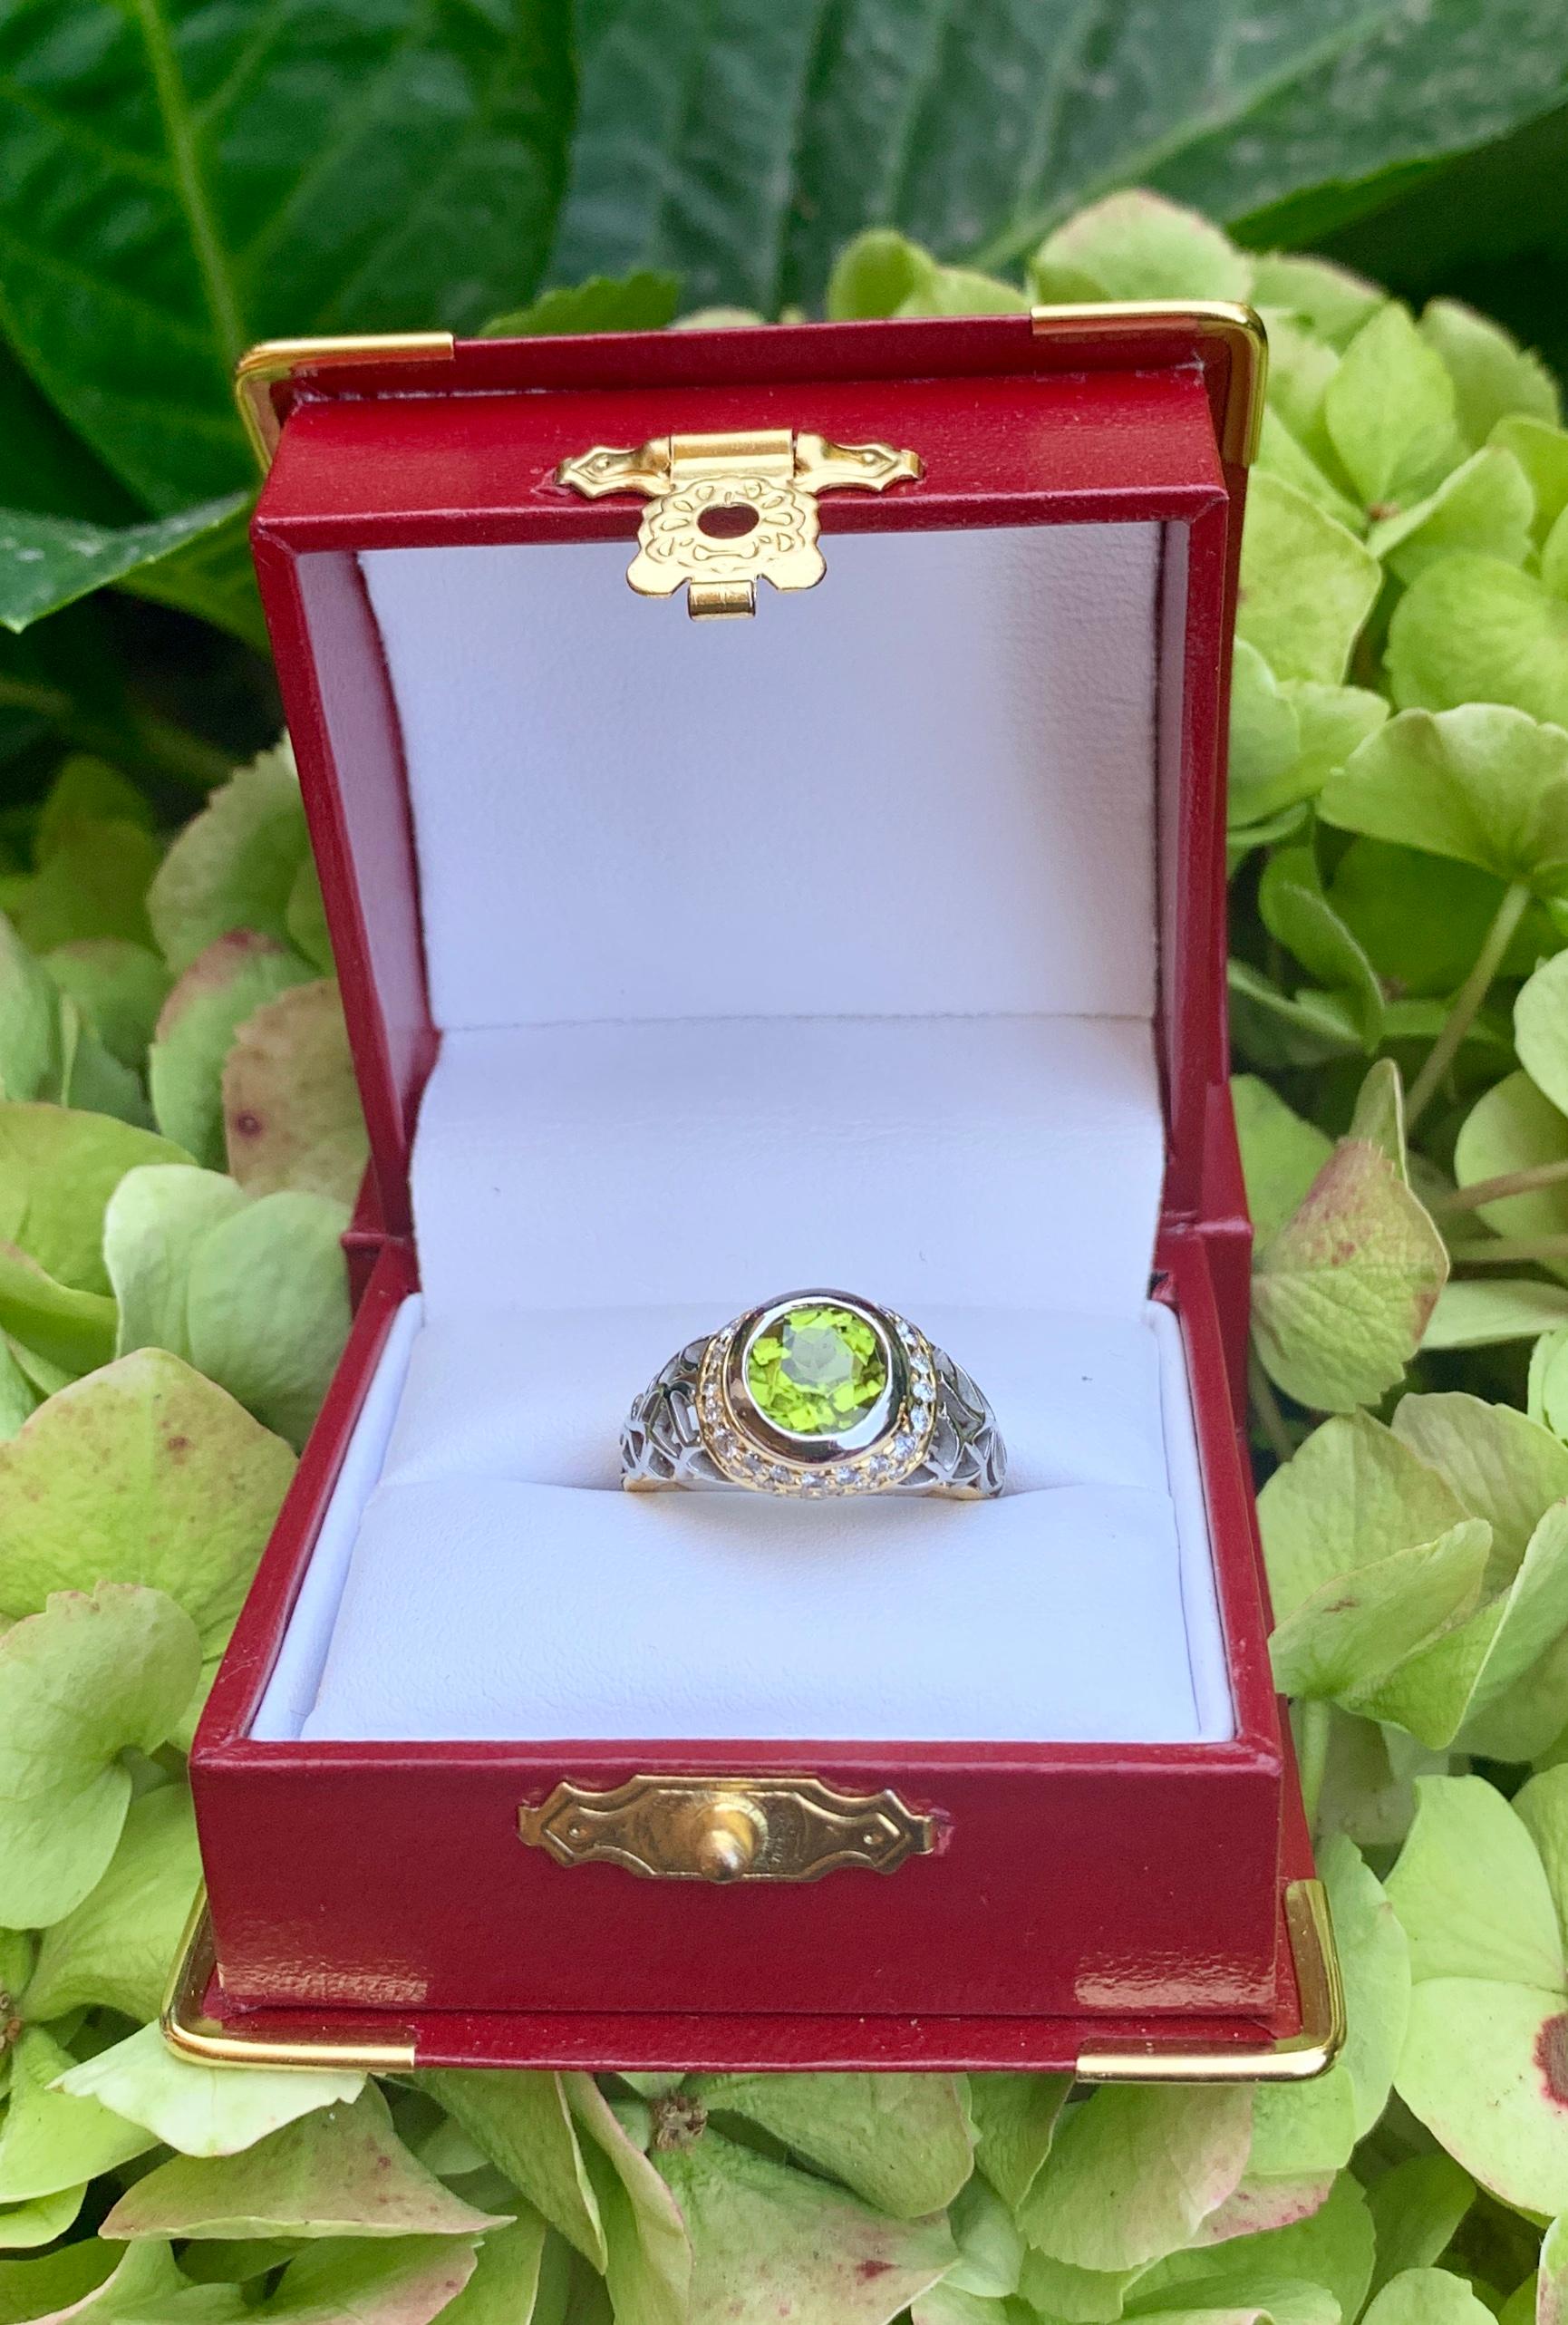 In this striking, custom made ring, a vivid chartreuse green round peridot gemstone is bezel set in 14 karat yellow gold and surrounded by pave set round white diamonds. The shoulders of the ring feature a modern abstract openwork pattern in